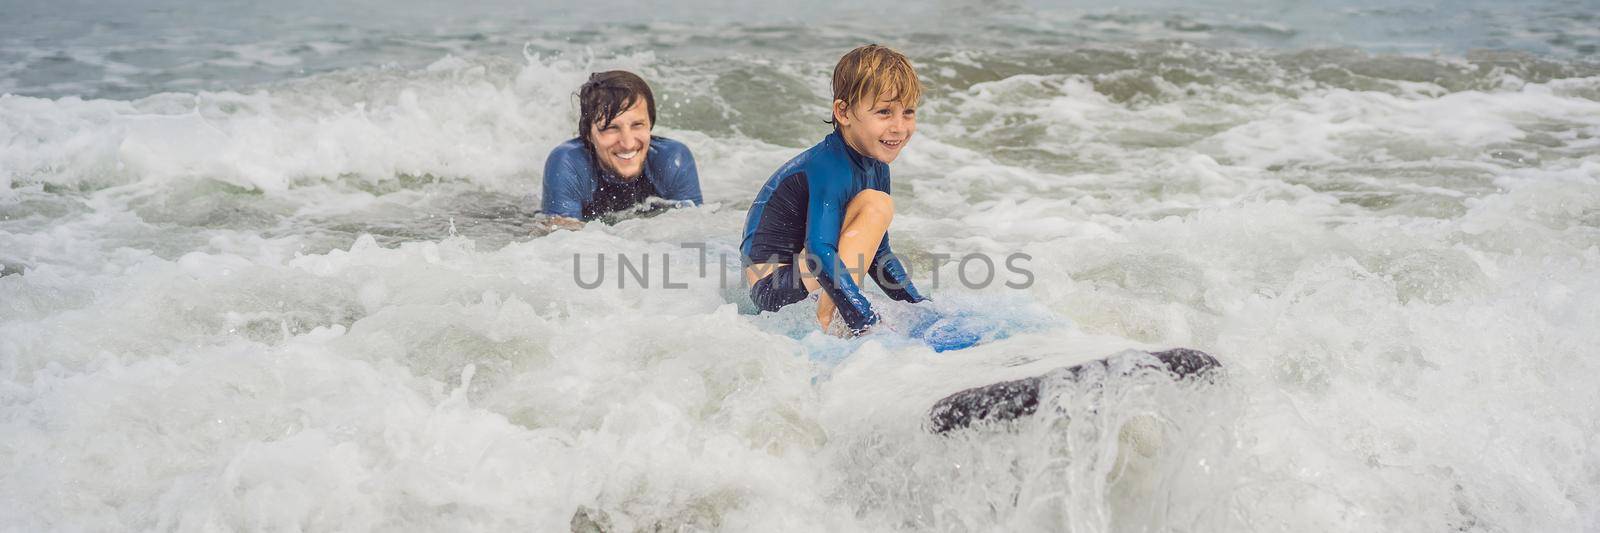 Father or instructor teaching his 5 year old son how to surf in the sea on vacation or holiday. Travel and sports with children concept. Surfing lesson for kids BANNER, LONG FORMAT by galitskaya